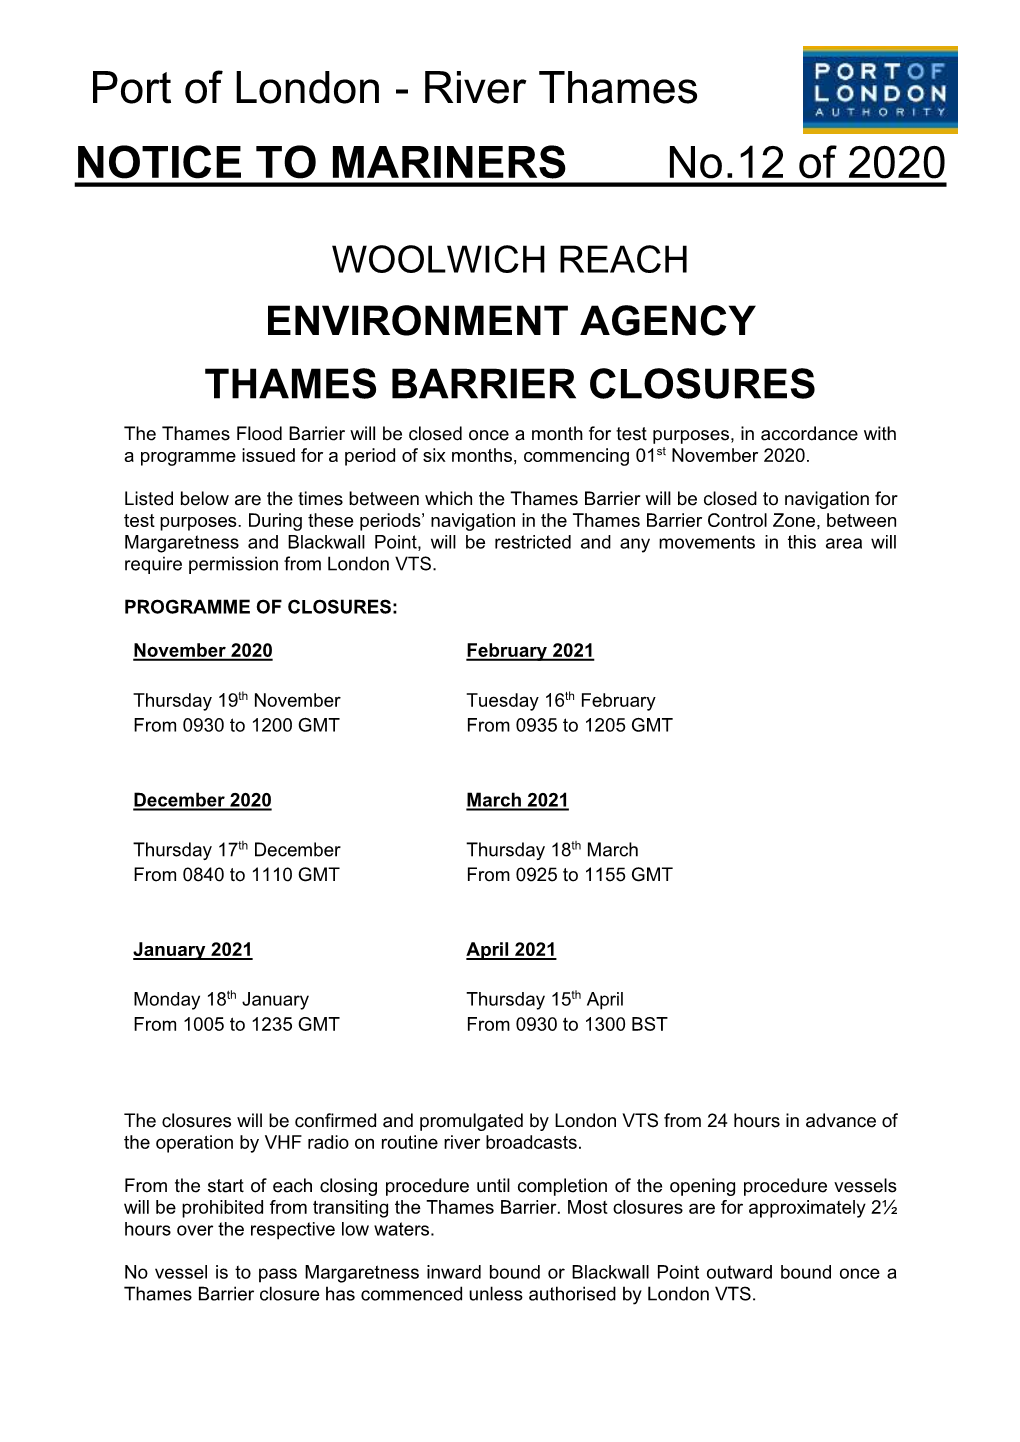 River Thames NOTICE to MARINERS No.12 of 2020